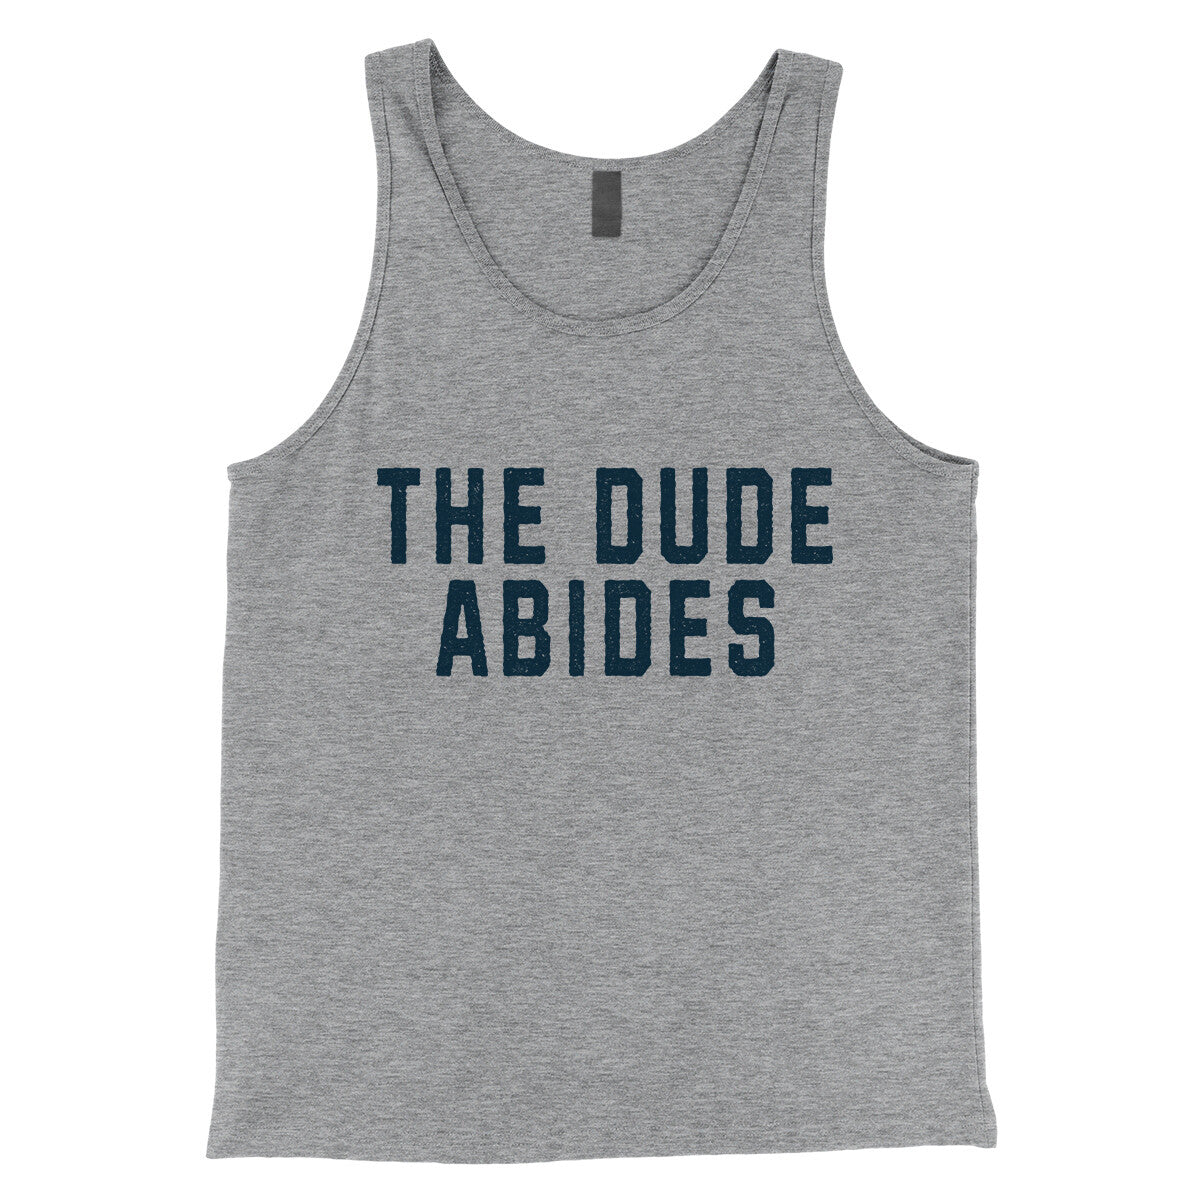 The Dude Abides in Athletic Heather Color